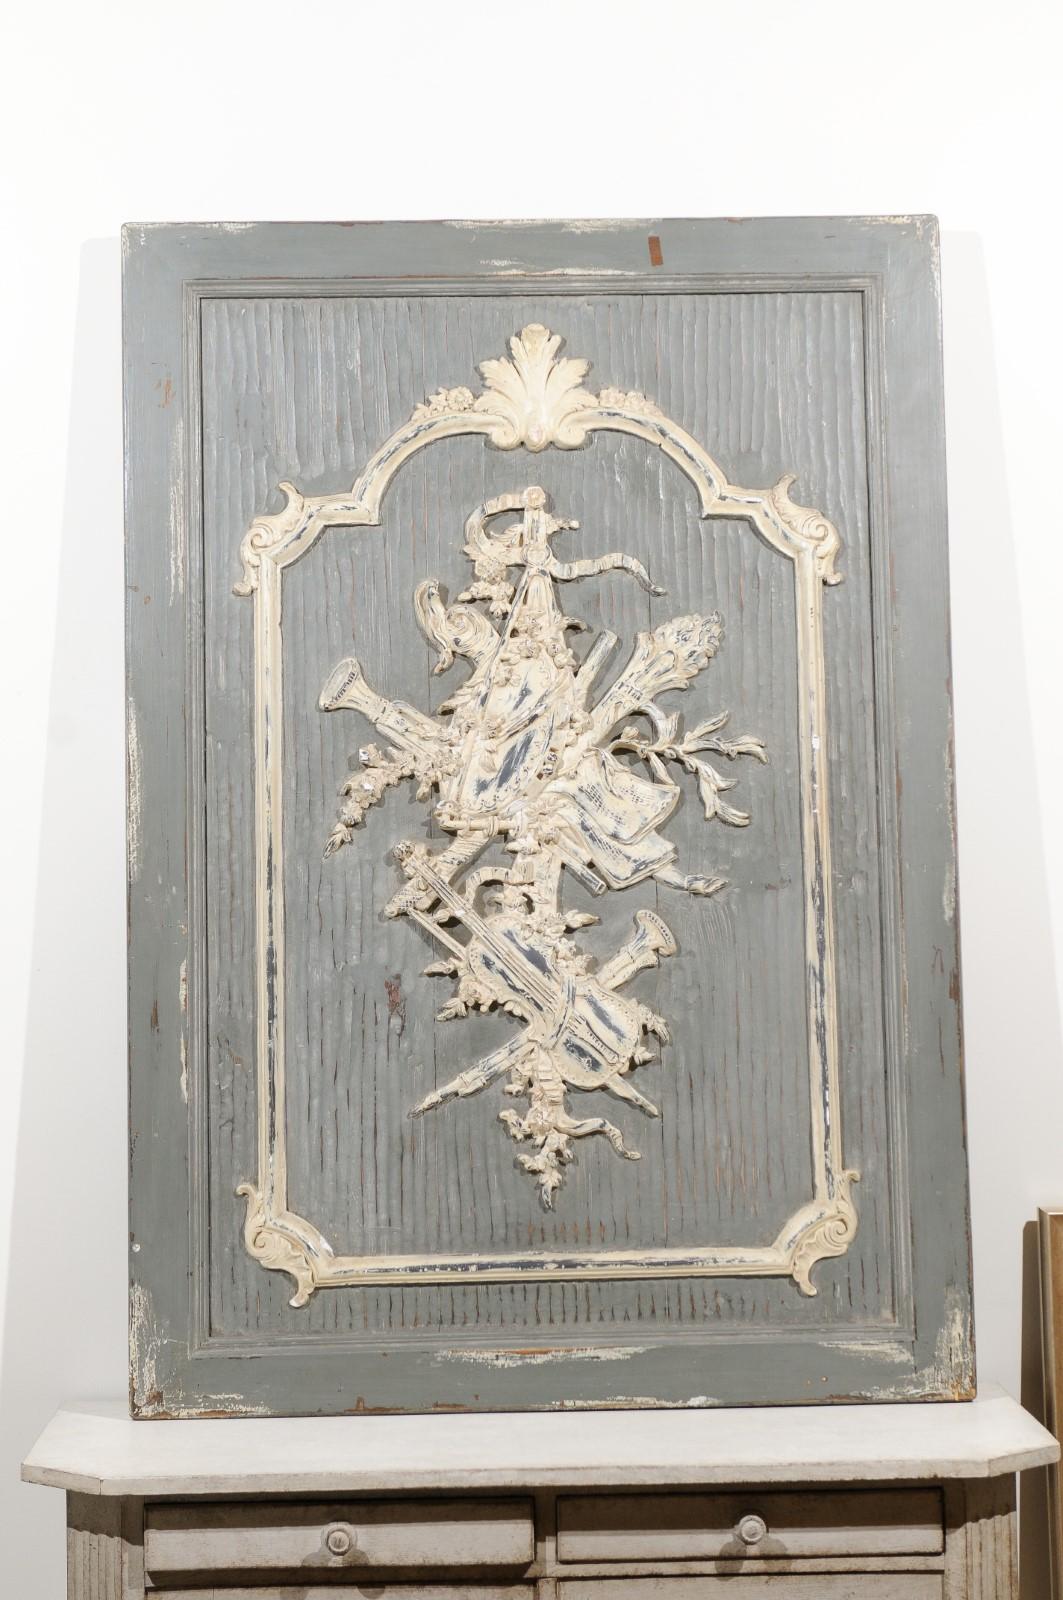 A French carved and painted wooden panel from the 19th century, with musical instruments. Created in France during the 19th century, this architectural panel features a grey painted textured ground adorned with a carved Allegory of the Liberal Arts